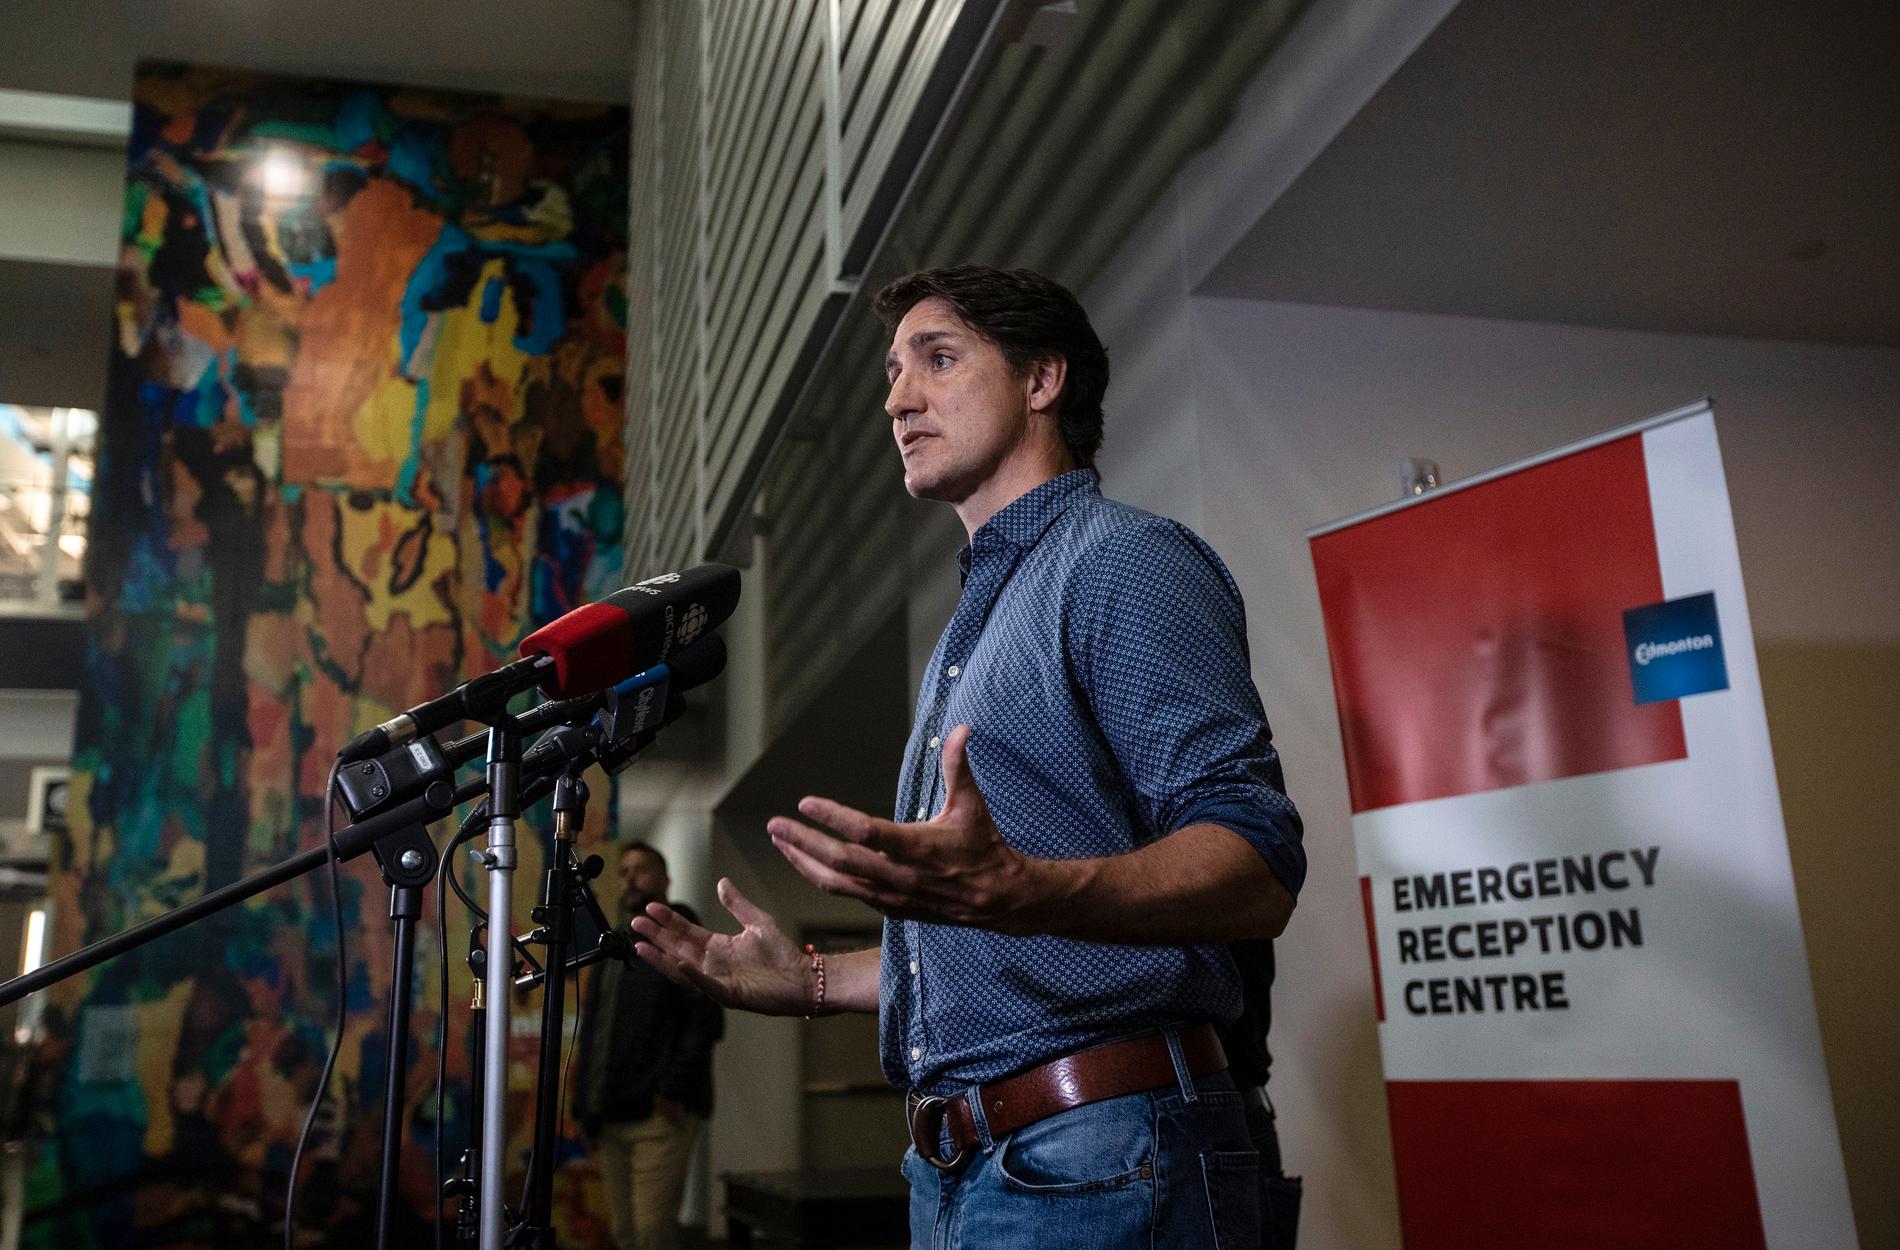 PRIME MINISTER: Prime Minister Justin Trudeau says thousands of people have had to evacuate their homes.